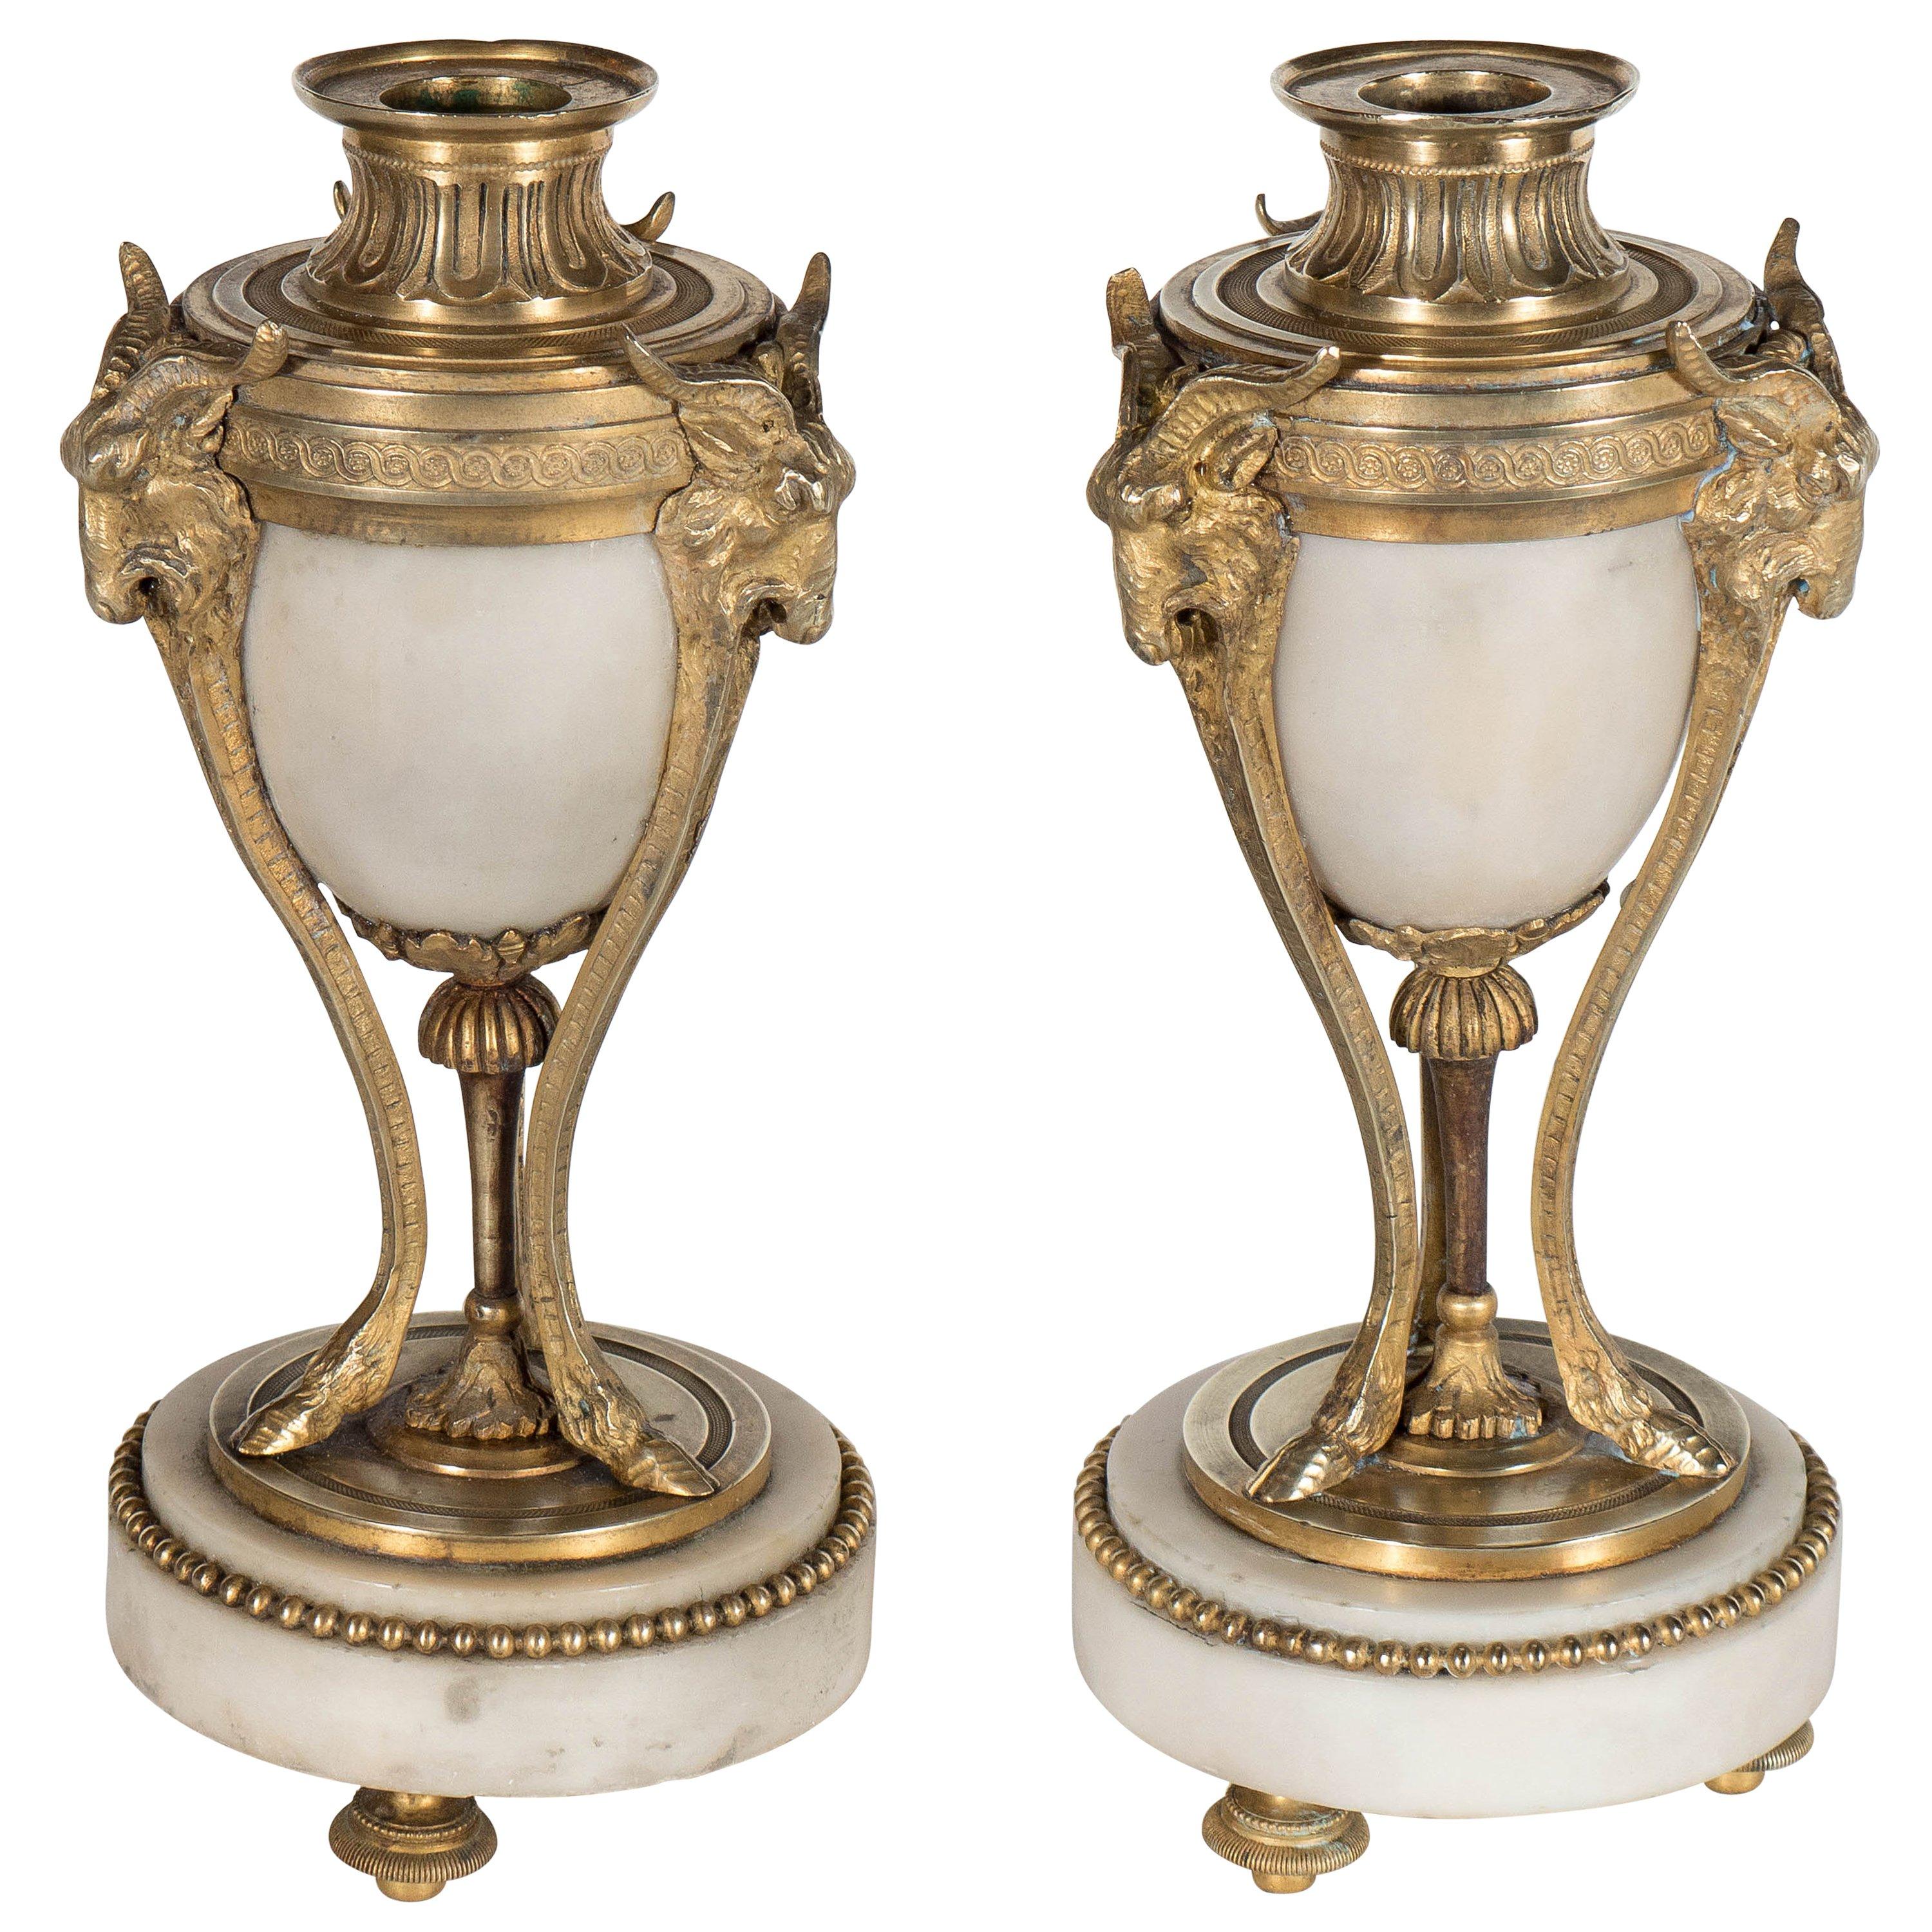 Pair of Fine French Ormolu and Alabaster Candlesticks with Goat & Hoof Motif